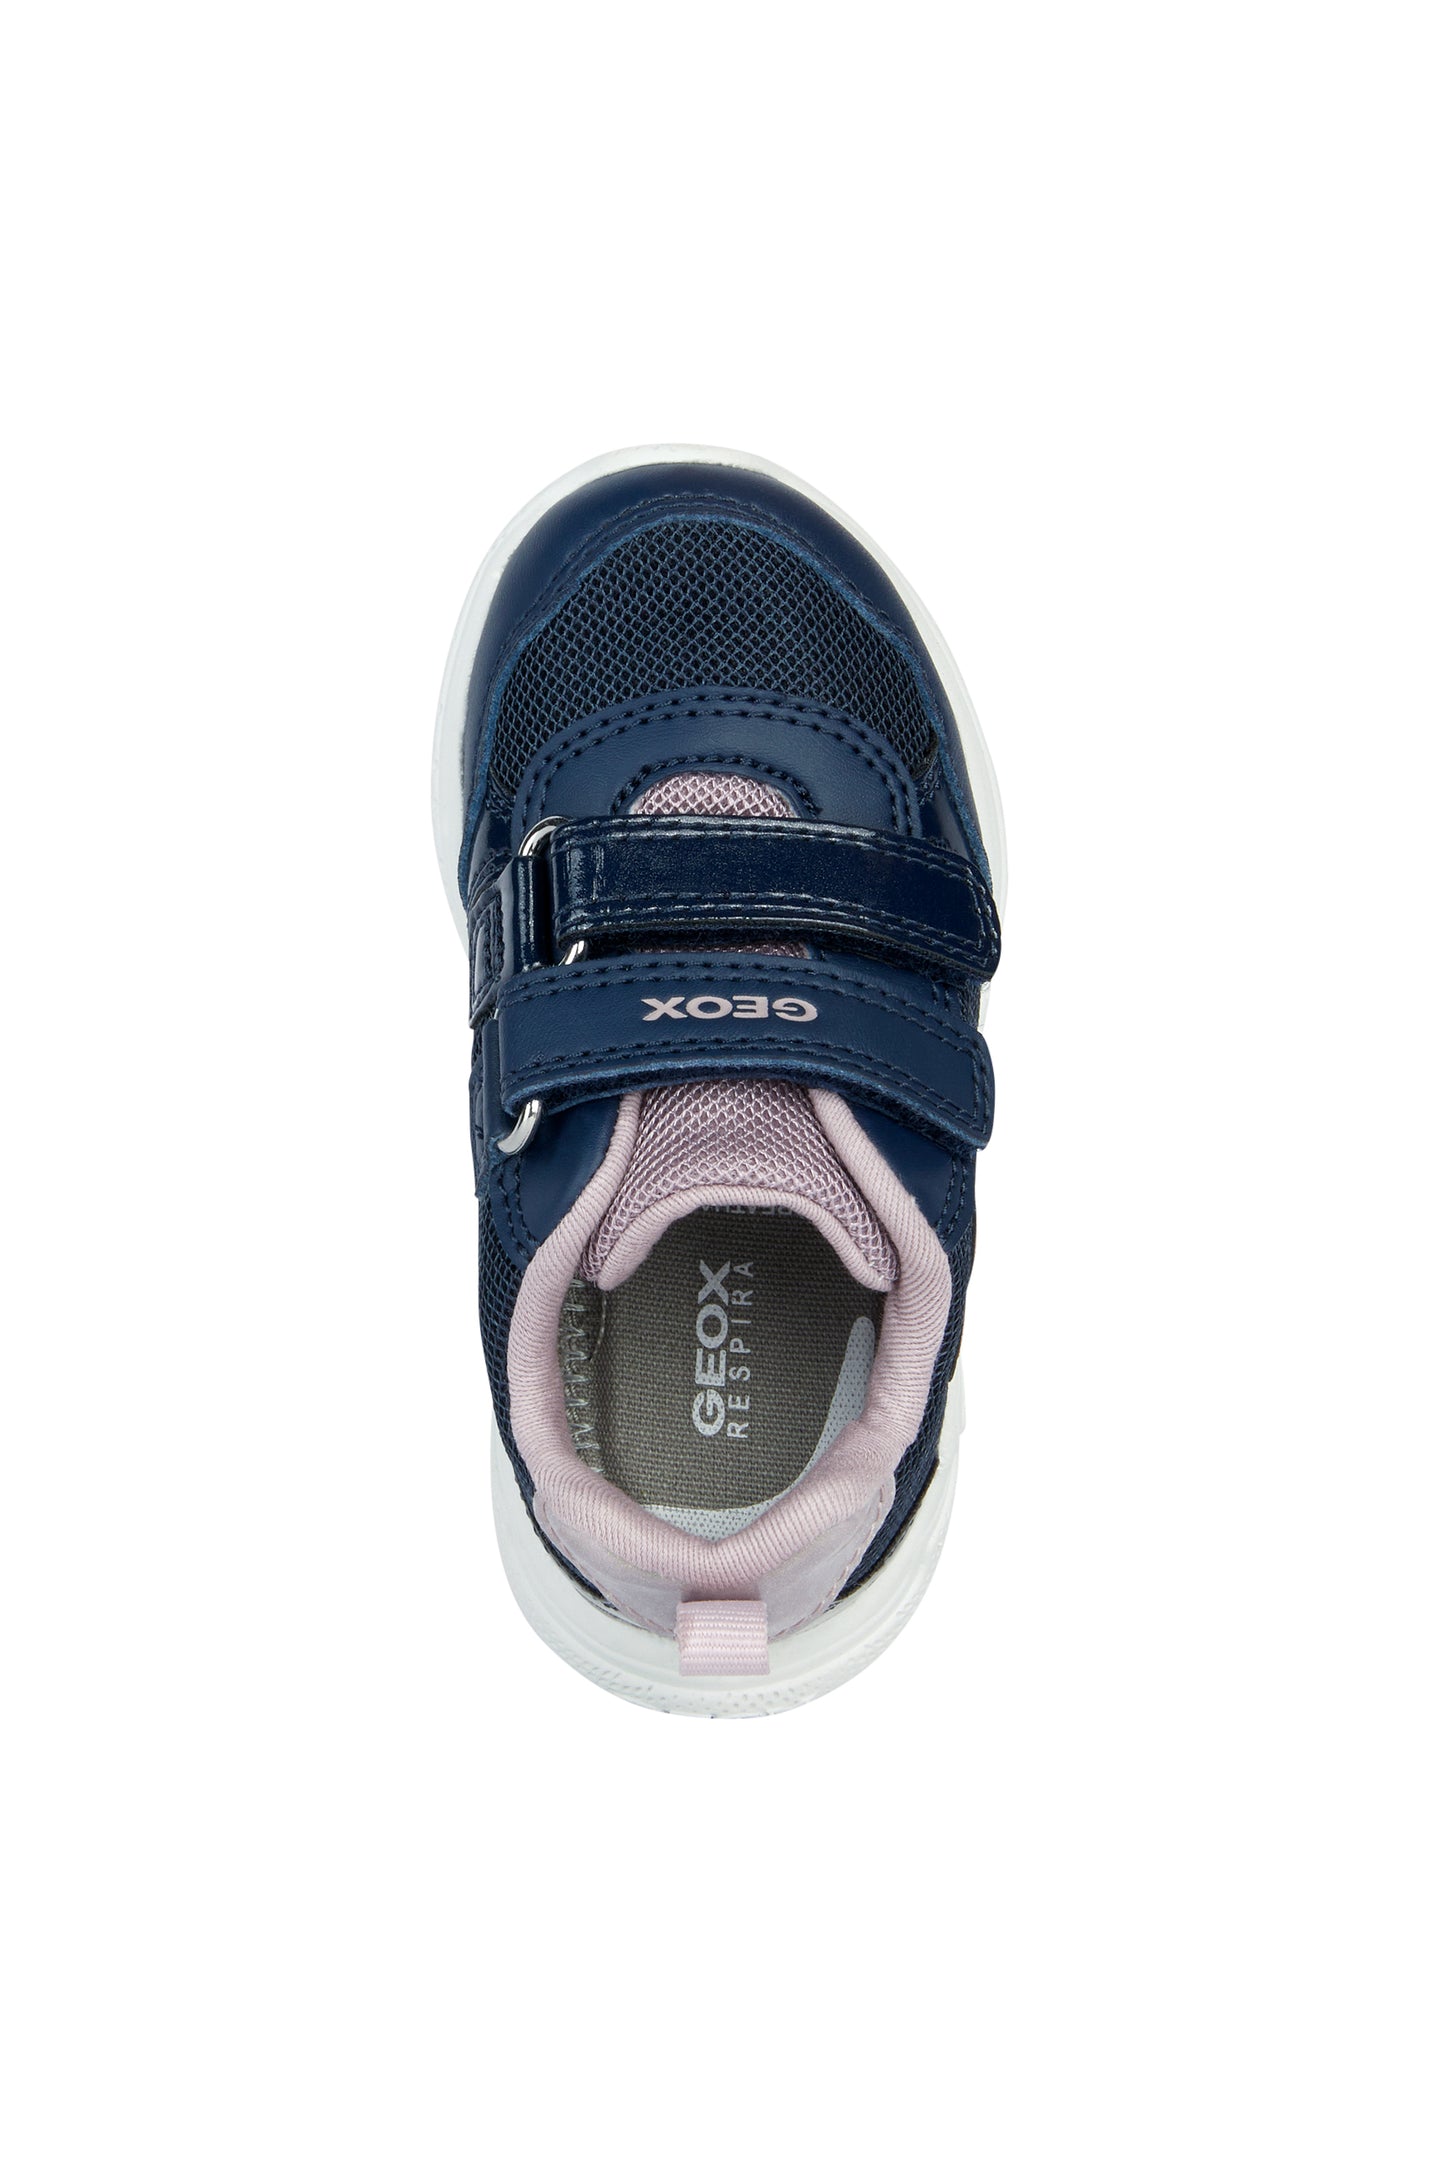 A girls trainer by Geox, style Sprintye, in navy and rose with double velcro fastening. Above view. 